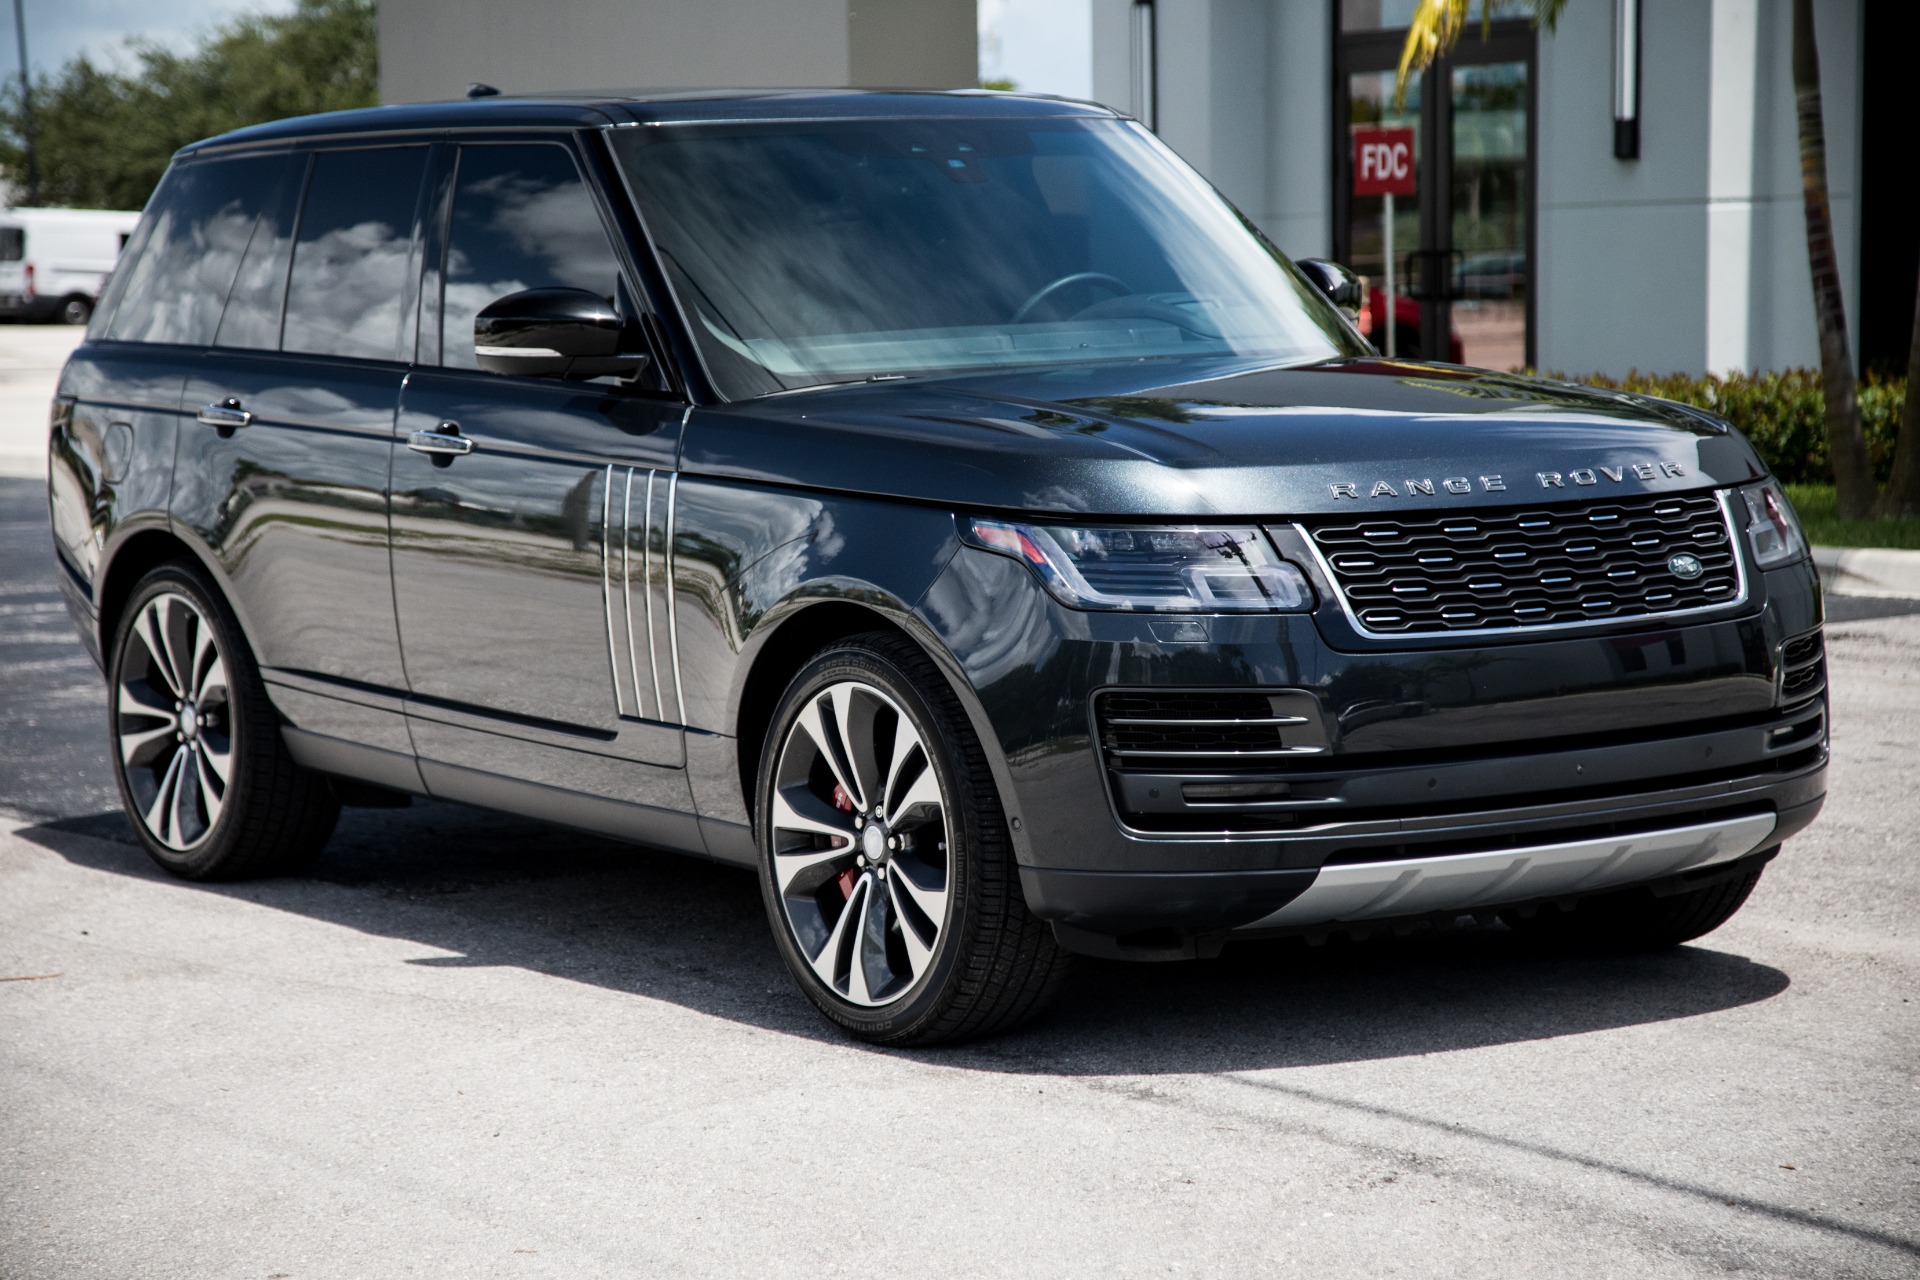 Used 2019 Land Rover Range Rover SVAutobiography Dynamic